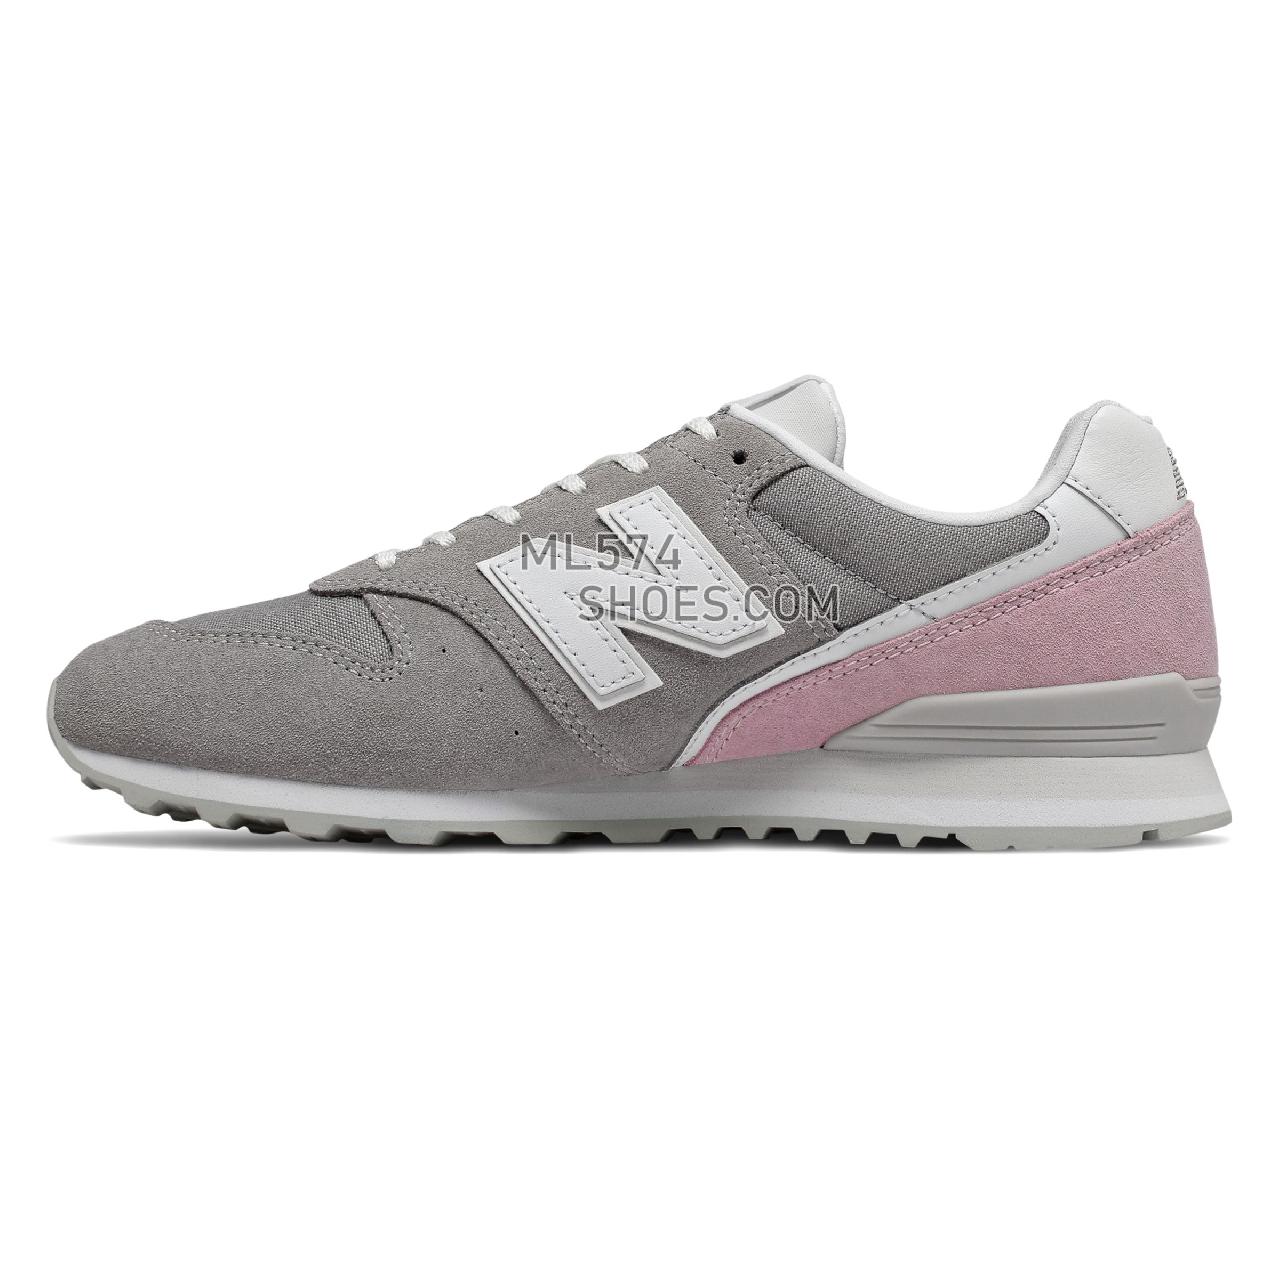 New Balance 996 - Women's Classic Sneakers - Marblehead with Oxygen Pink - WL996BC